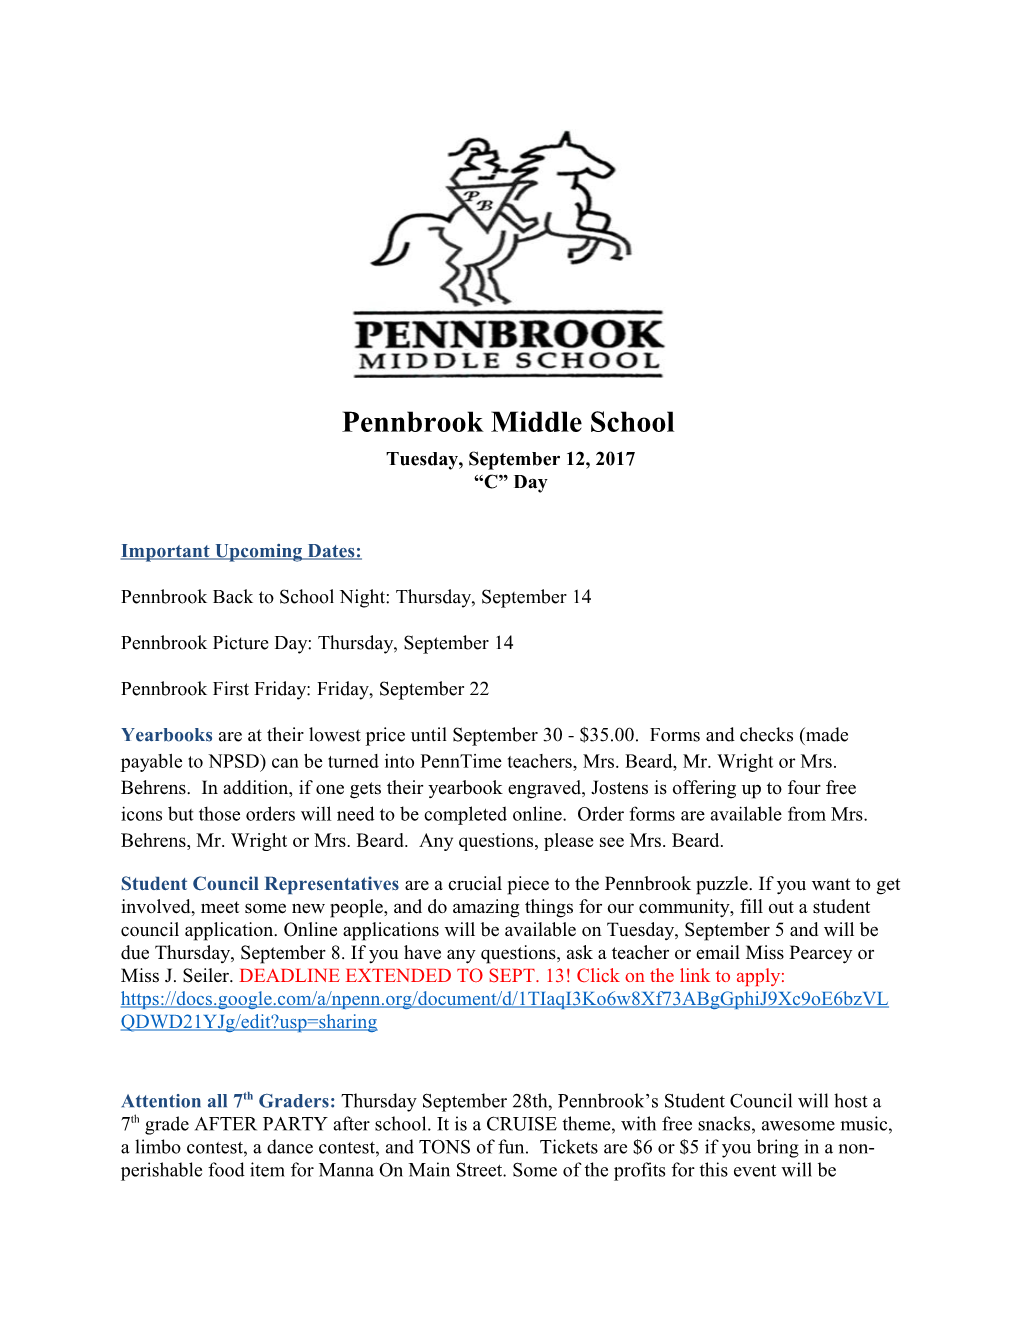 Pennbrook Middle School s2